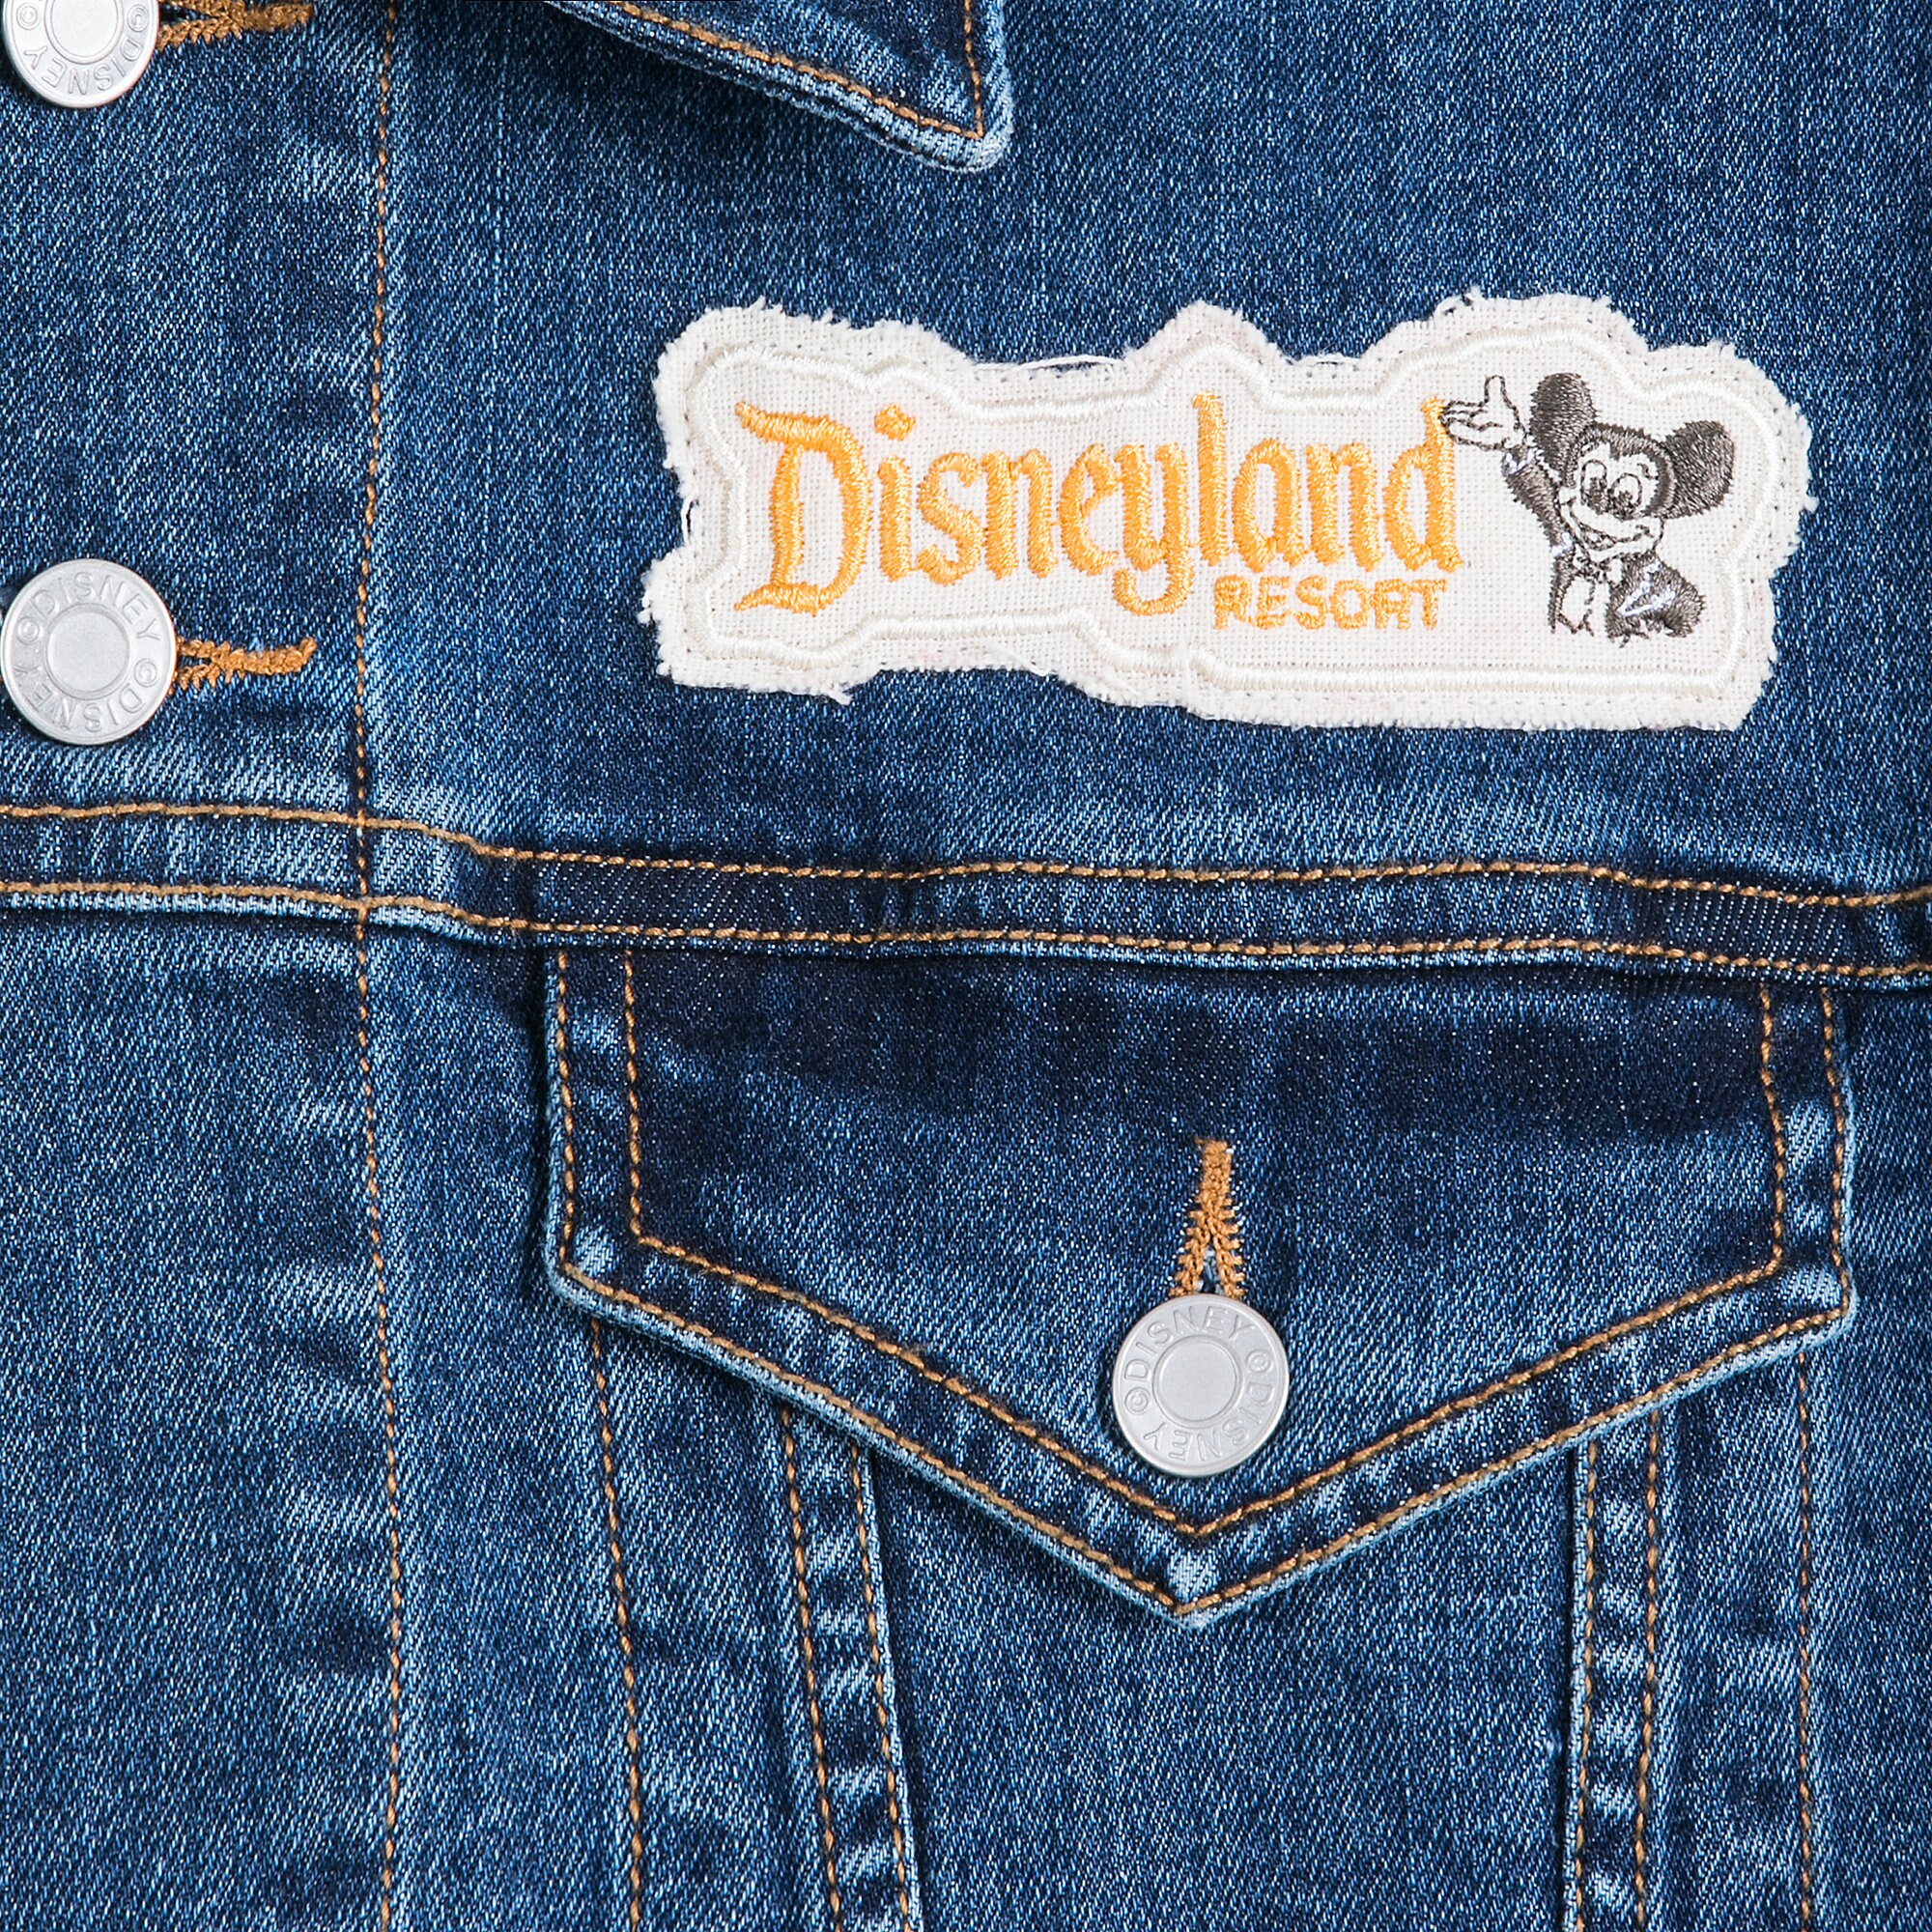 Mickey Mouse Denim Jacket for Adults - Disneyland